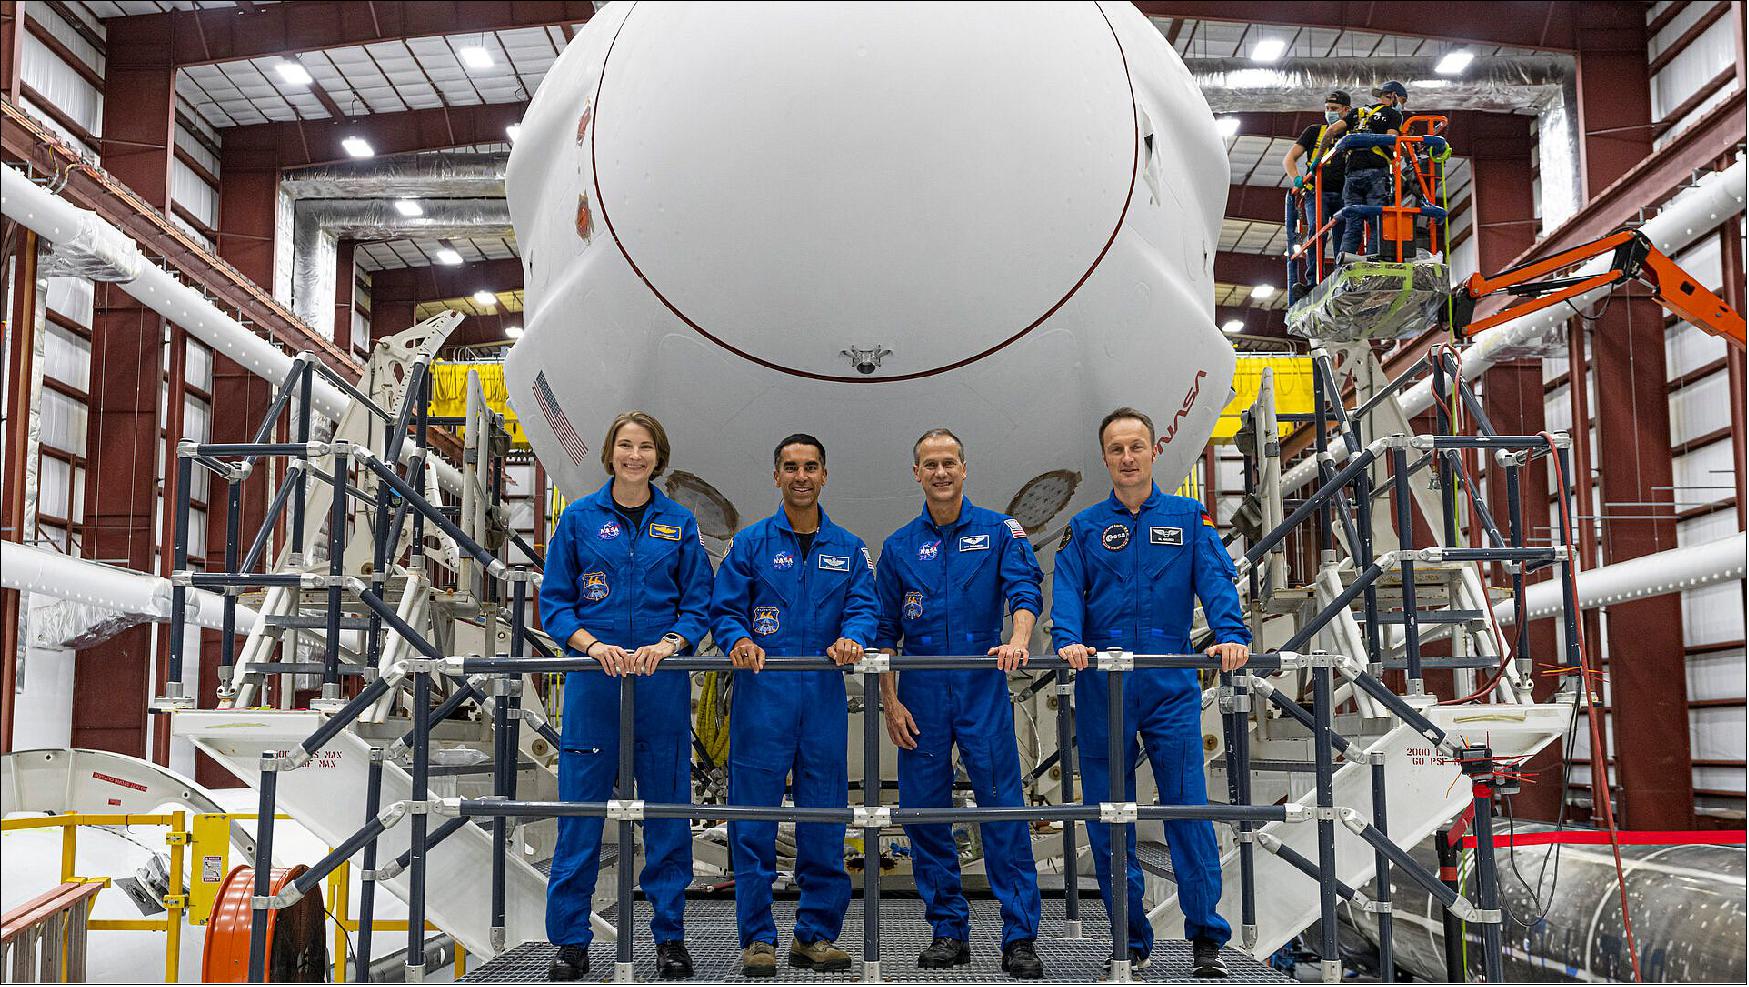 Figure 3: Crew-3 astronauts Kayla Barron, Raja Chari, Tom Marshburn and Matthias Maurer in the SpaceX hangar at NASA's Kennedy Space Center in Florida, USA where their Crew Dragon spacecraft Endurance is ready for launch to the International Space Station (image credit: SpaceX) 5)